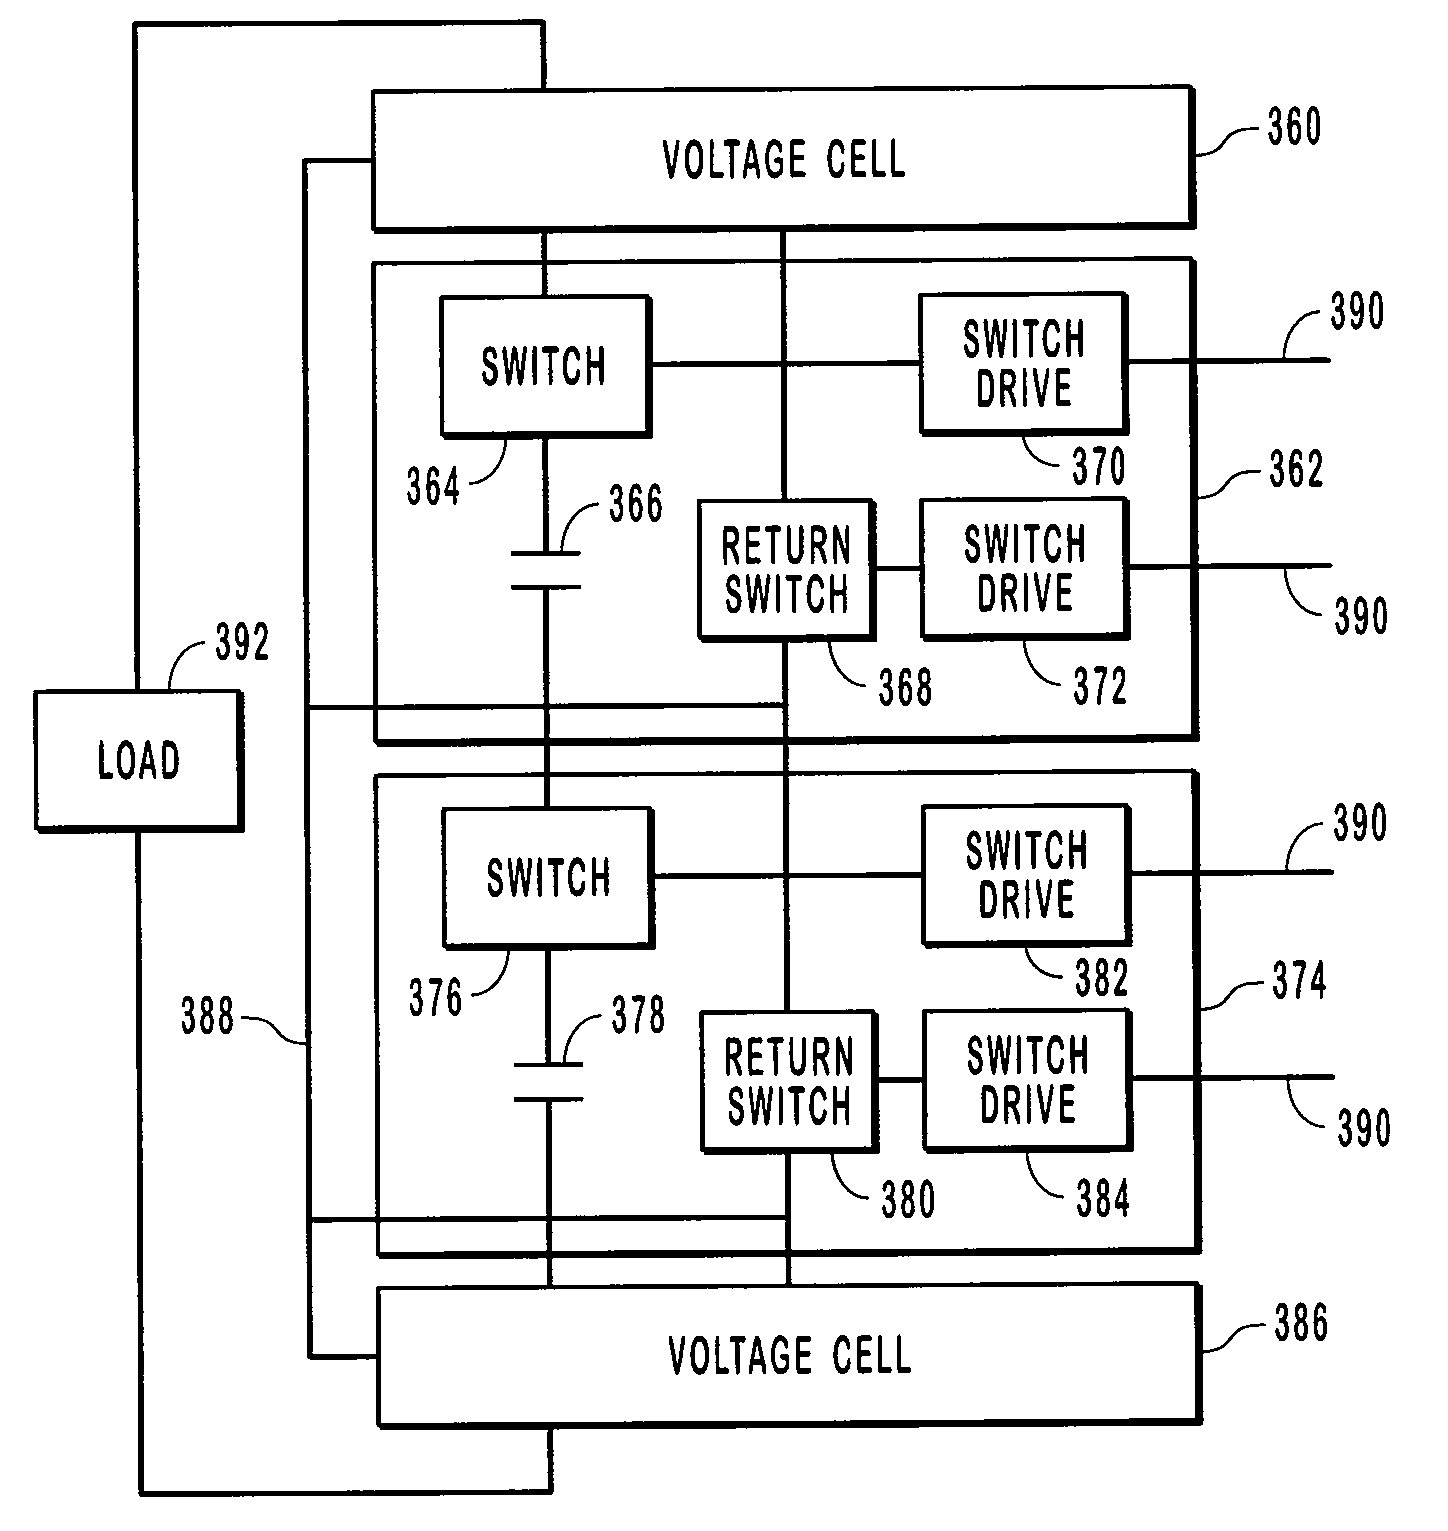 High voltage pulsed power supply using solid state switches